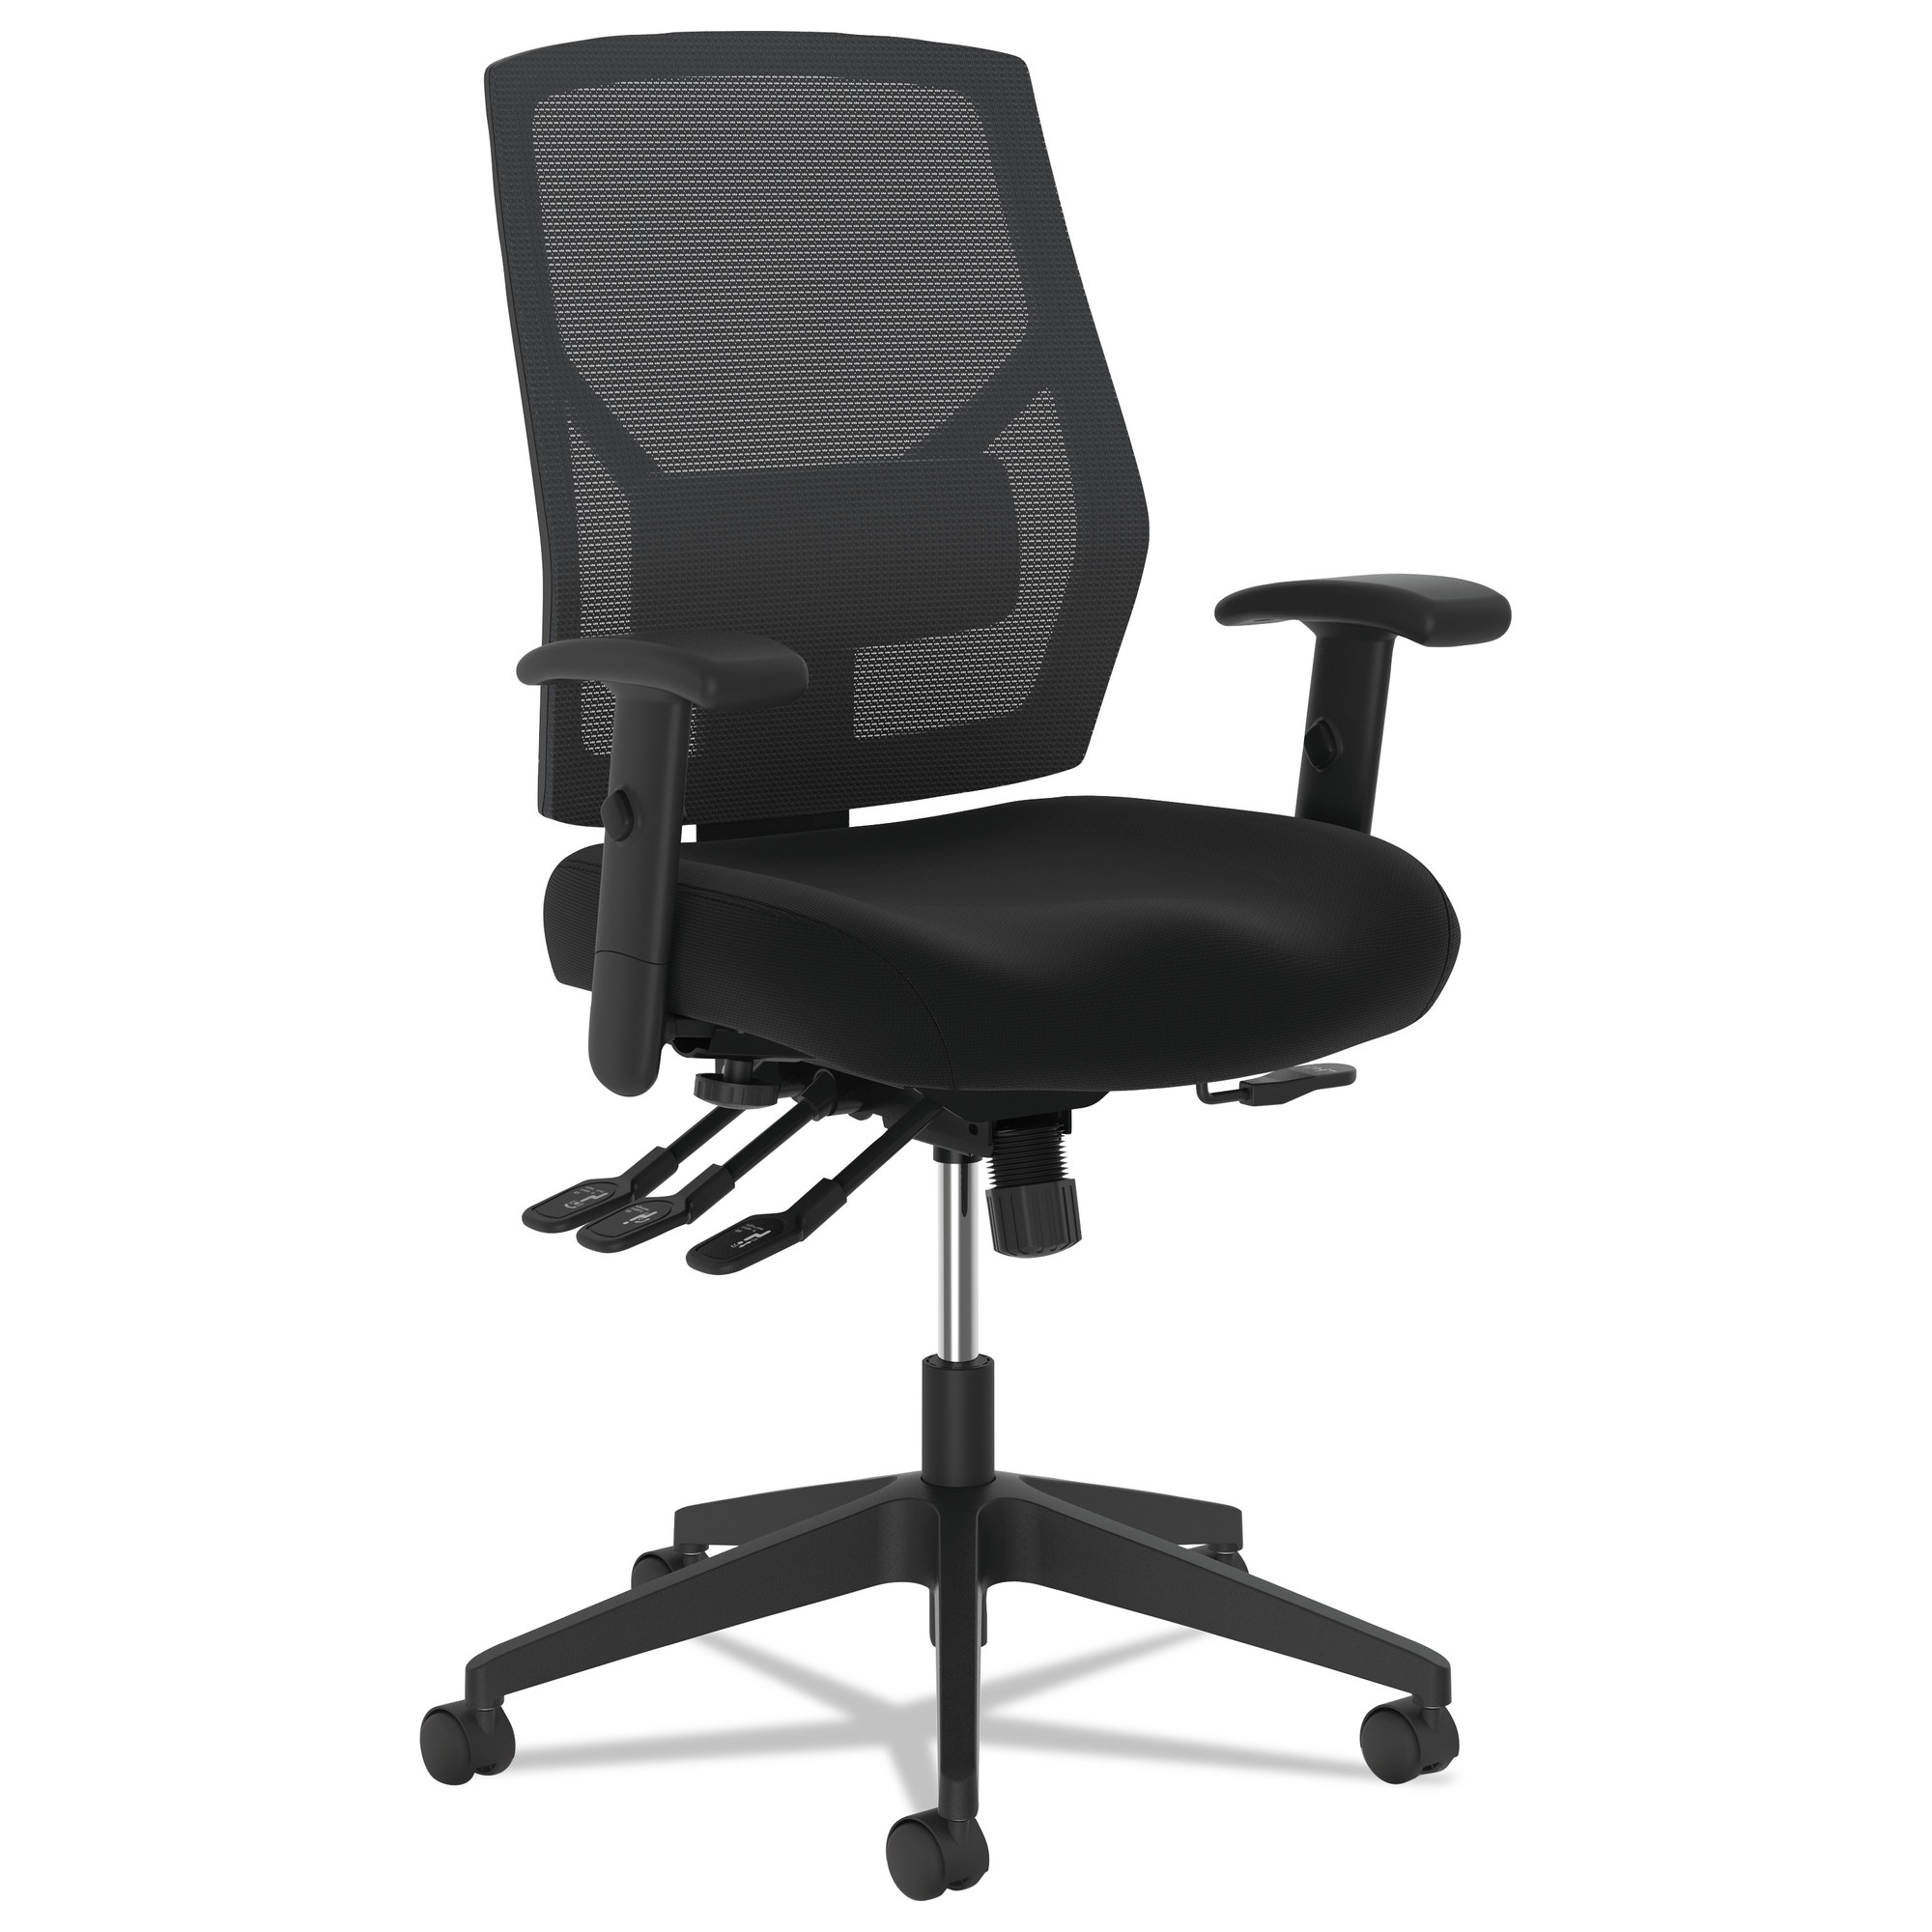 HON Crio High-Back Task Chair -Mesh Back Computer Chair with Asynchronous Control for Office Desk, Black (HVL582)